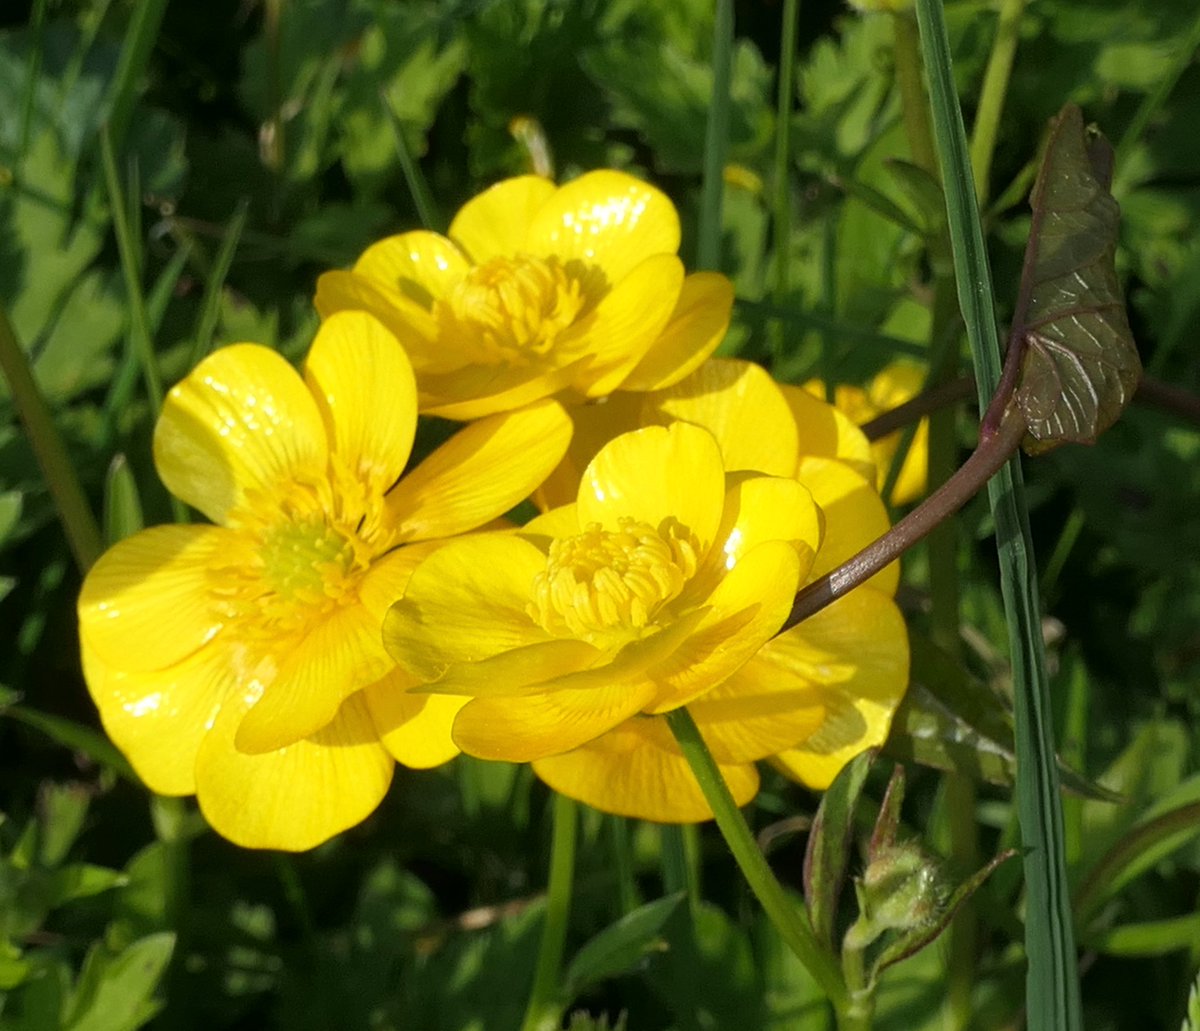 Bindweed wrapping the #buttercup stalks together making gorgeous posies 😊 #SundayYellow